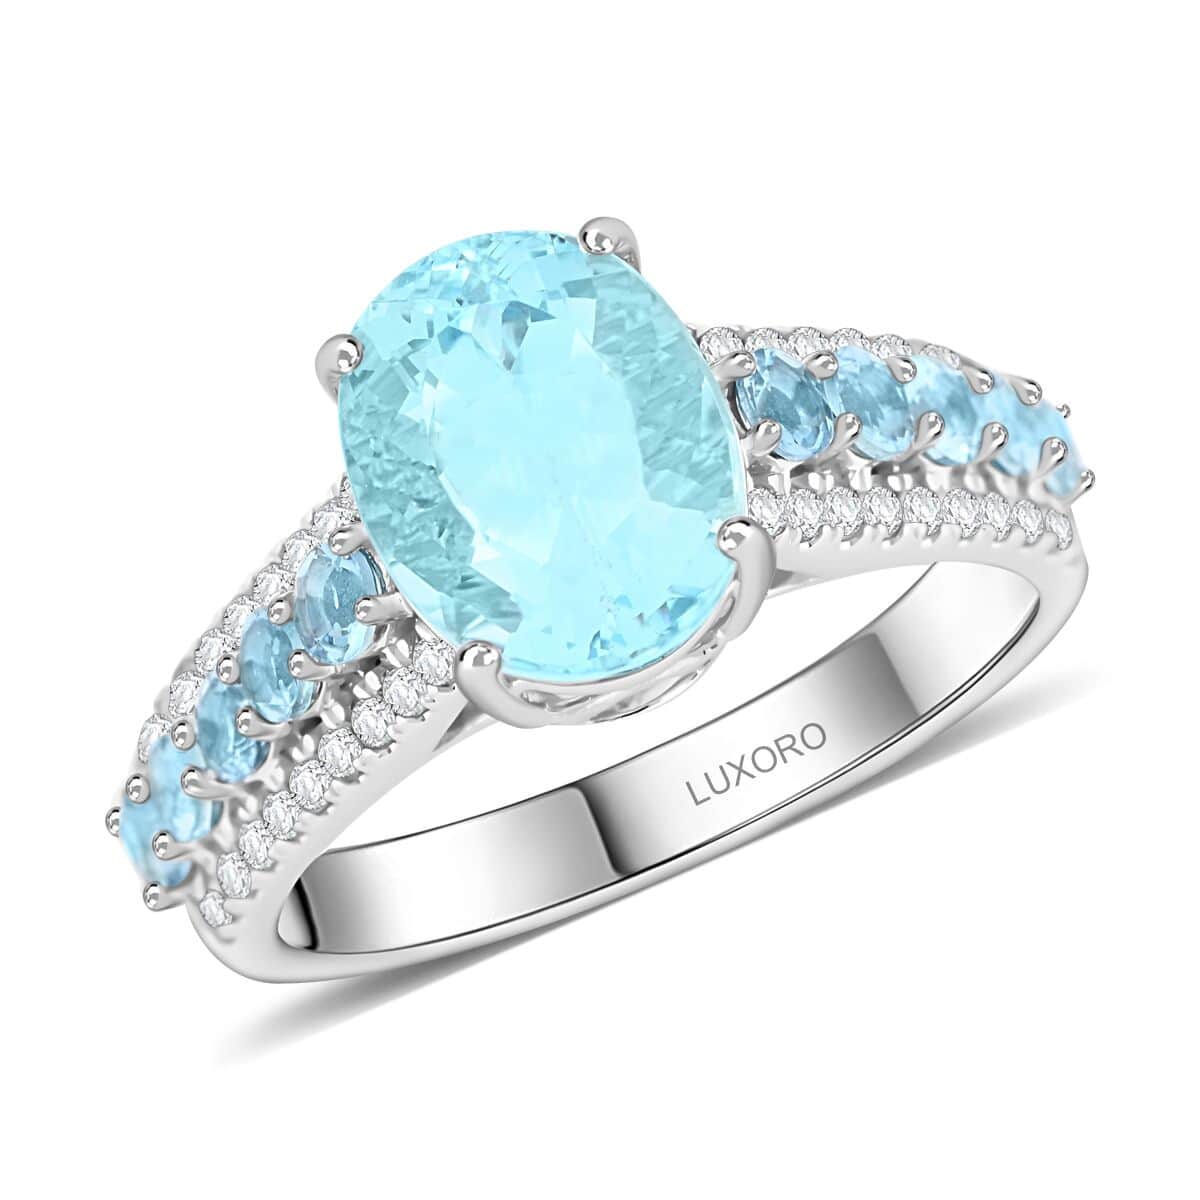 Certified & Appraised Luxoro 14K White Gold AAA Santa Maria Aquamarine and G-H I2 Diamond Ring (Size 6.0) 4.56 Grams 3.20 ctw image number 0